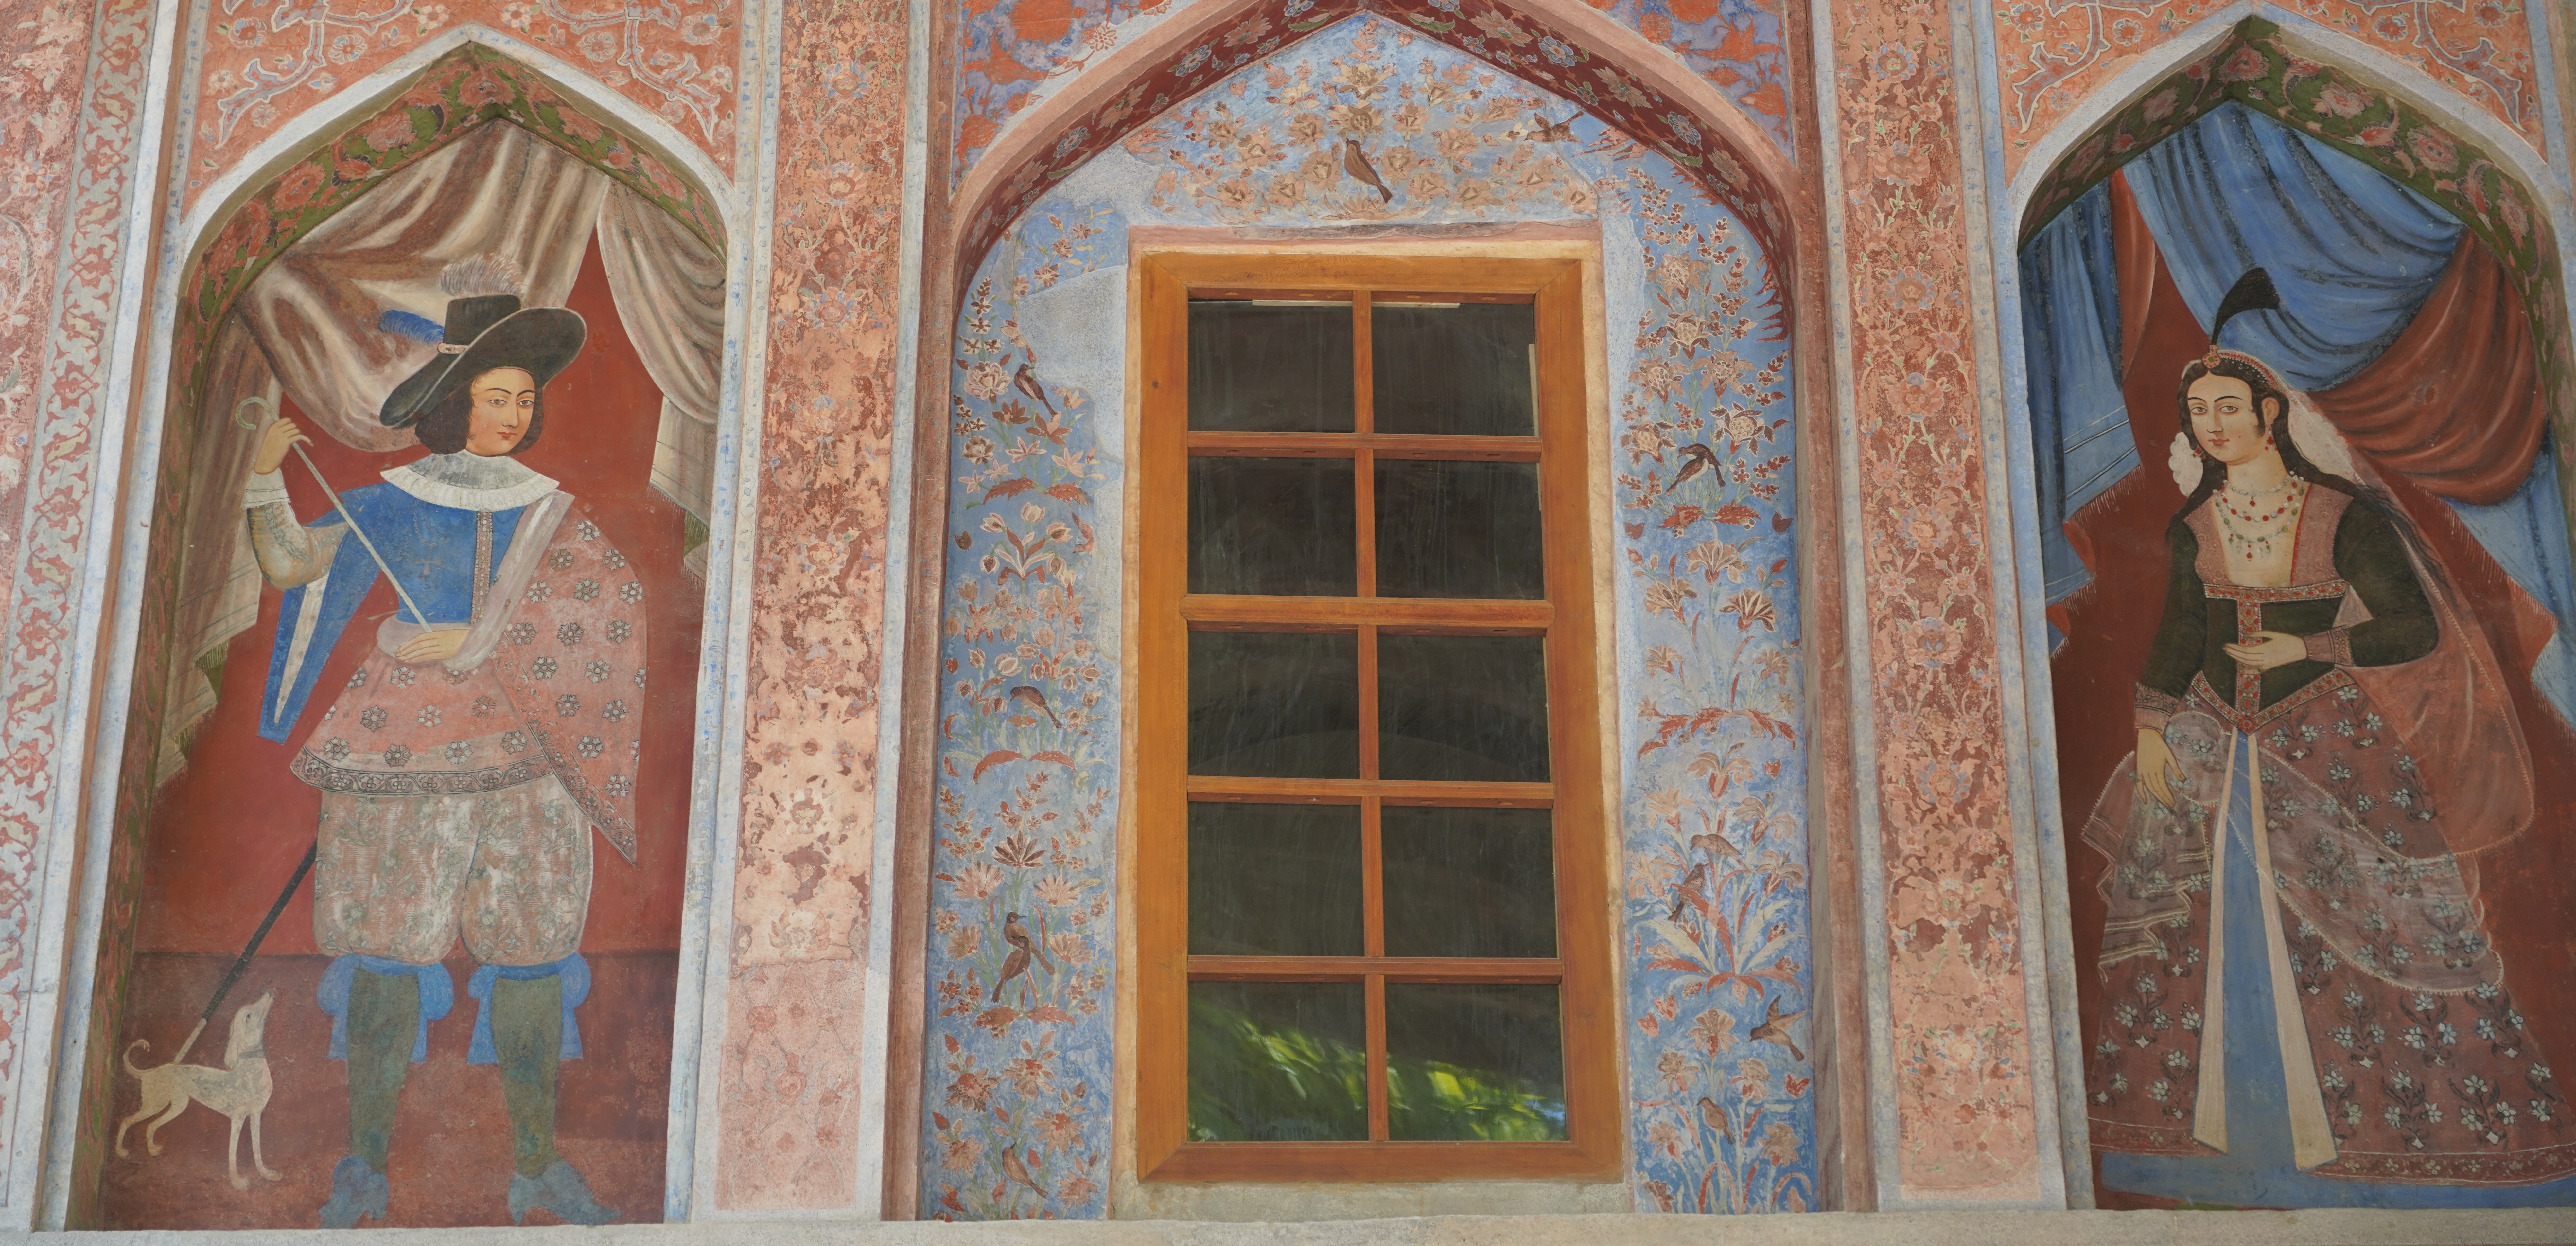 Wall painting of European figures in the Chihil Sutun Palace, Photo: Shunhua Jin, 2019